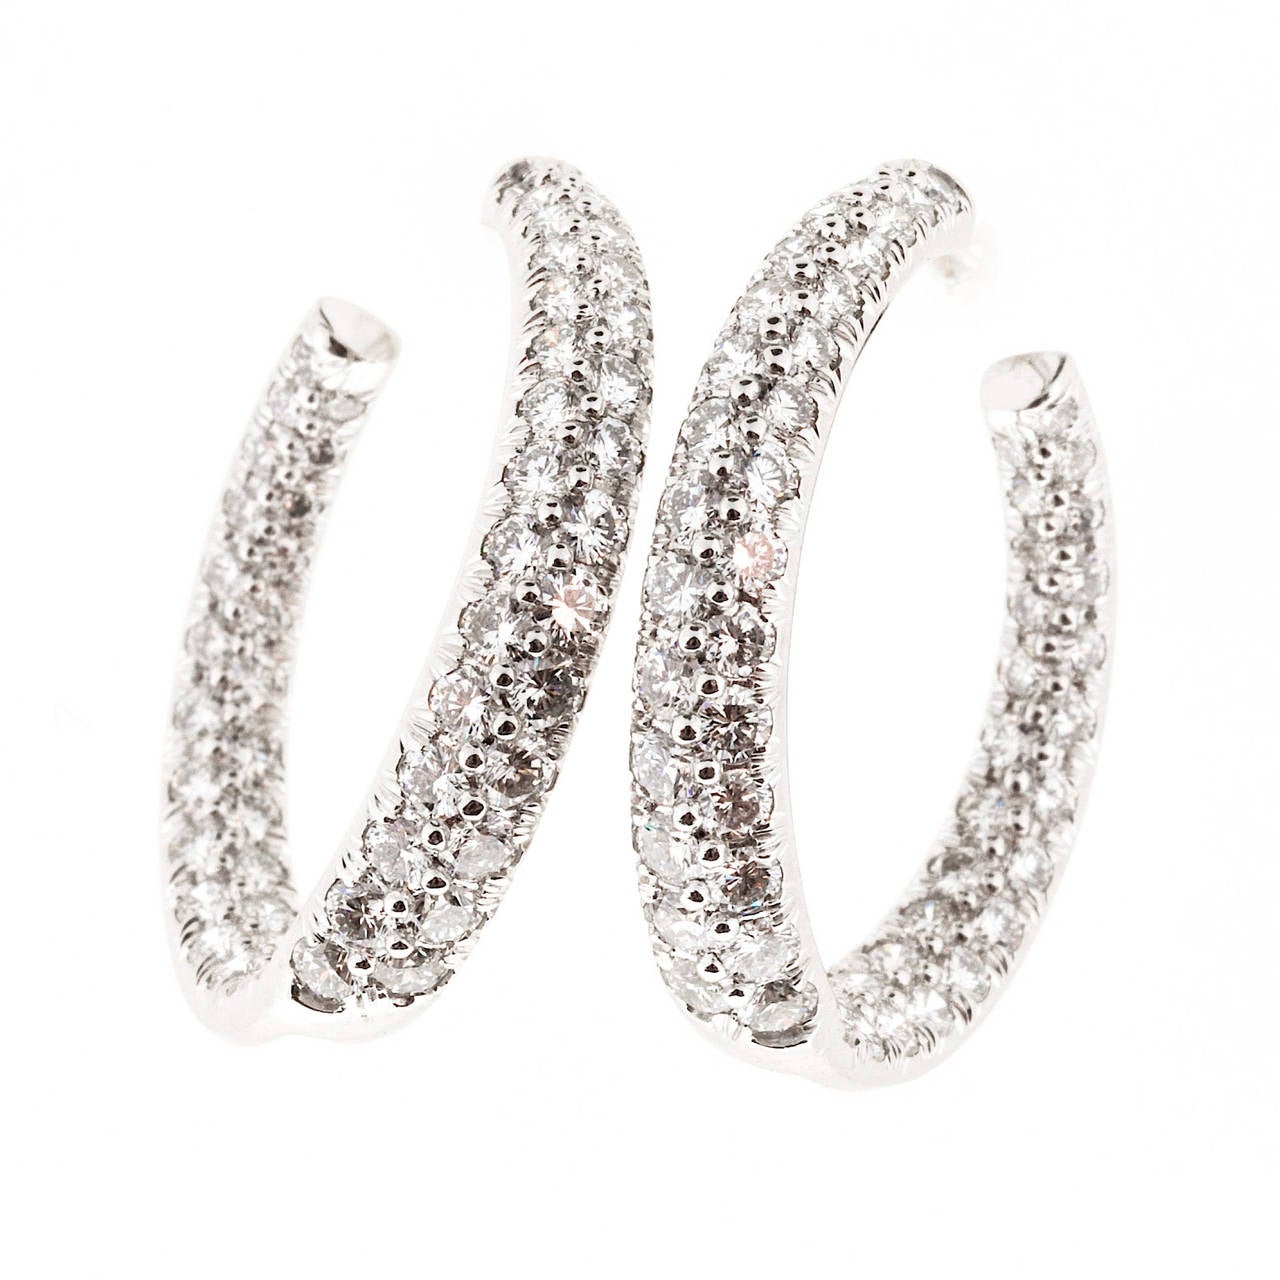 Kurt Wayne 3.50ct diamond inside out hoop earrings. Solid Platinum inside out slightly simple twist design hoop earrings. Platinum earring backs.

112 Ideal full cut diamonds, approx. total weight 3.50cts, E – F, VS1 – VS2
Tested: Platinum
Stamped: